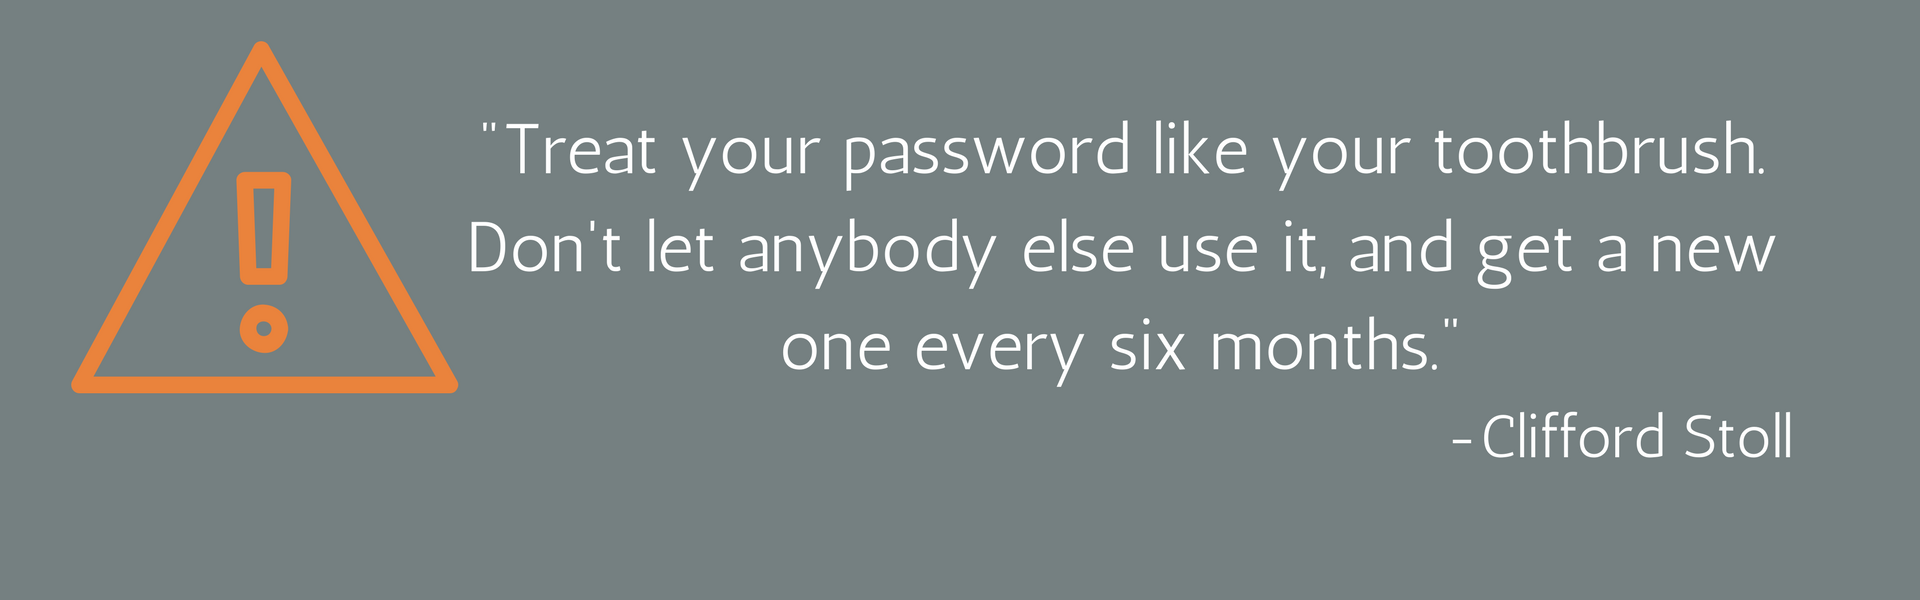 Treat your password like your toothbrush.